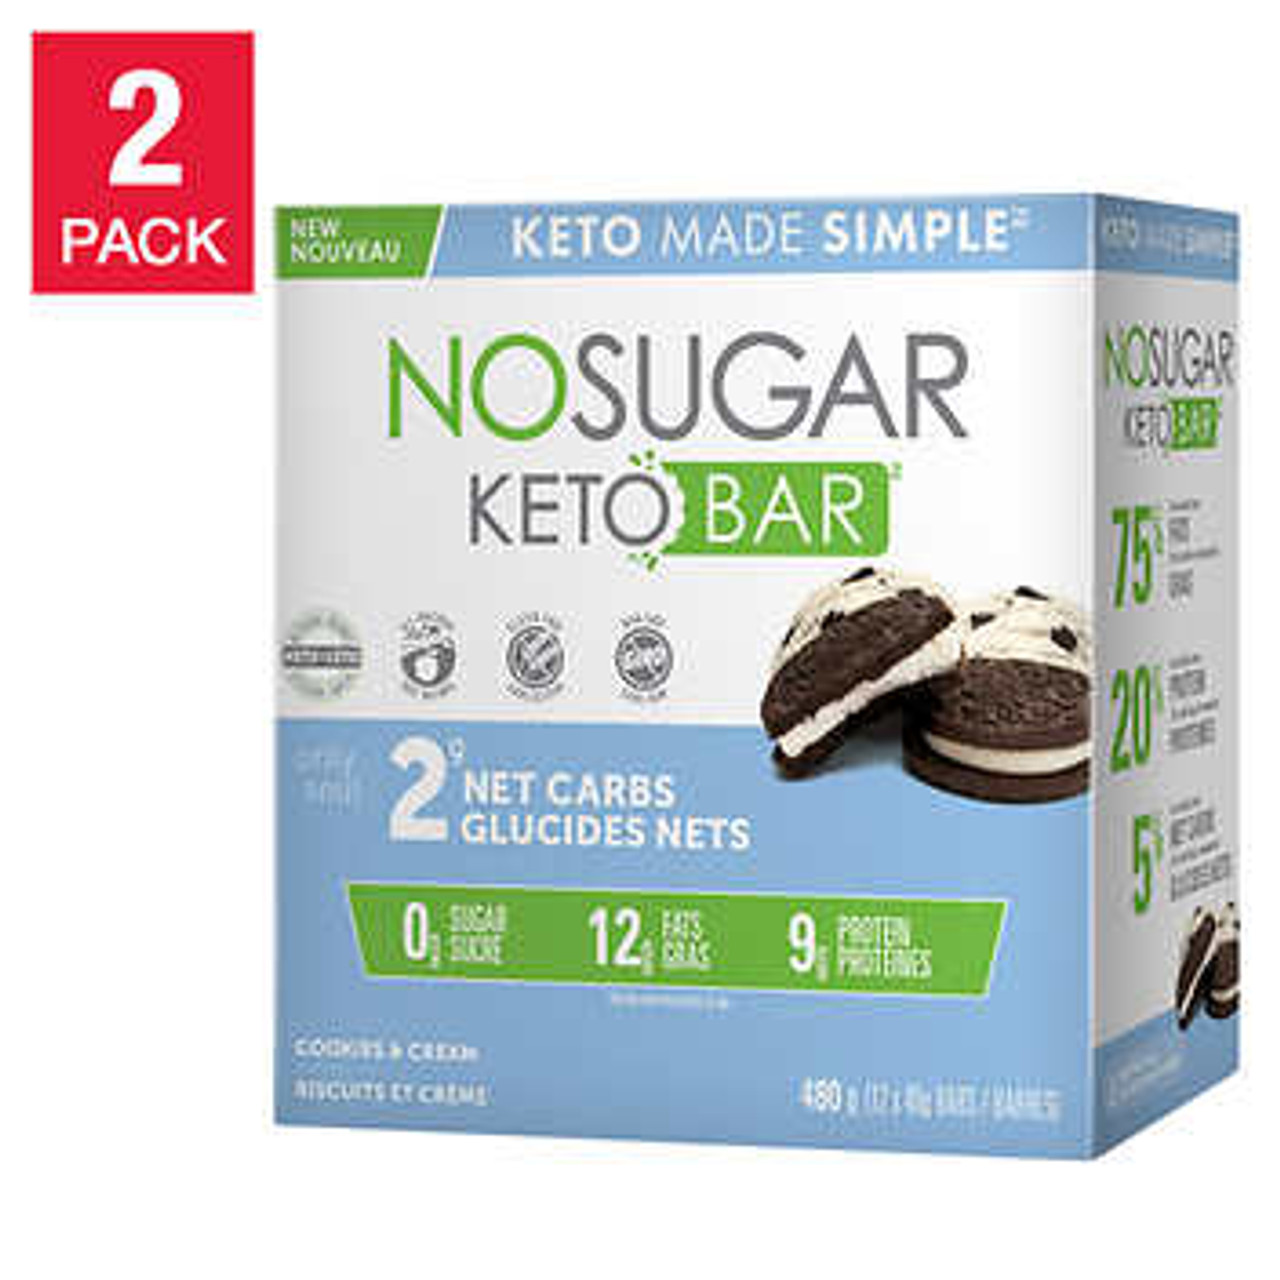 No Sugar Keto Bar Cookies and Cream 2-Pack - Low Carb, High Protein Snack- Chicken Pieces